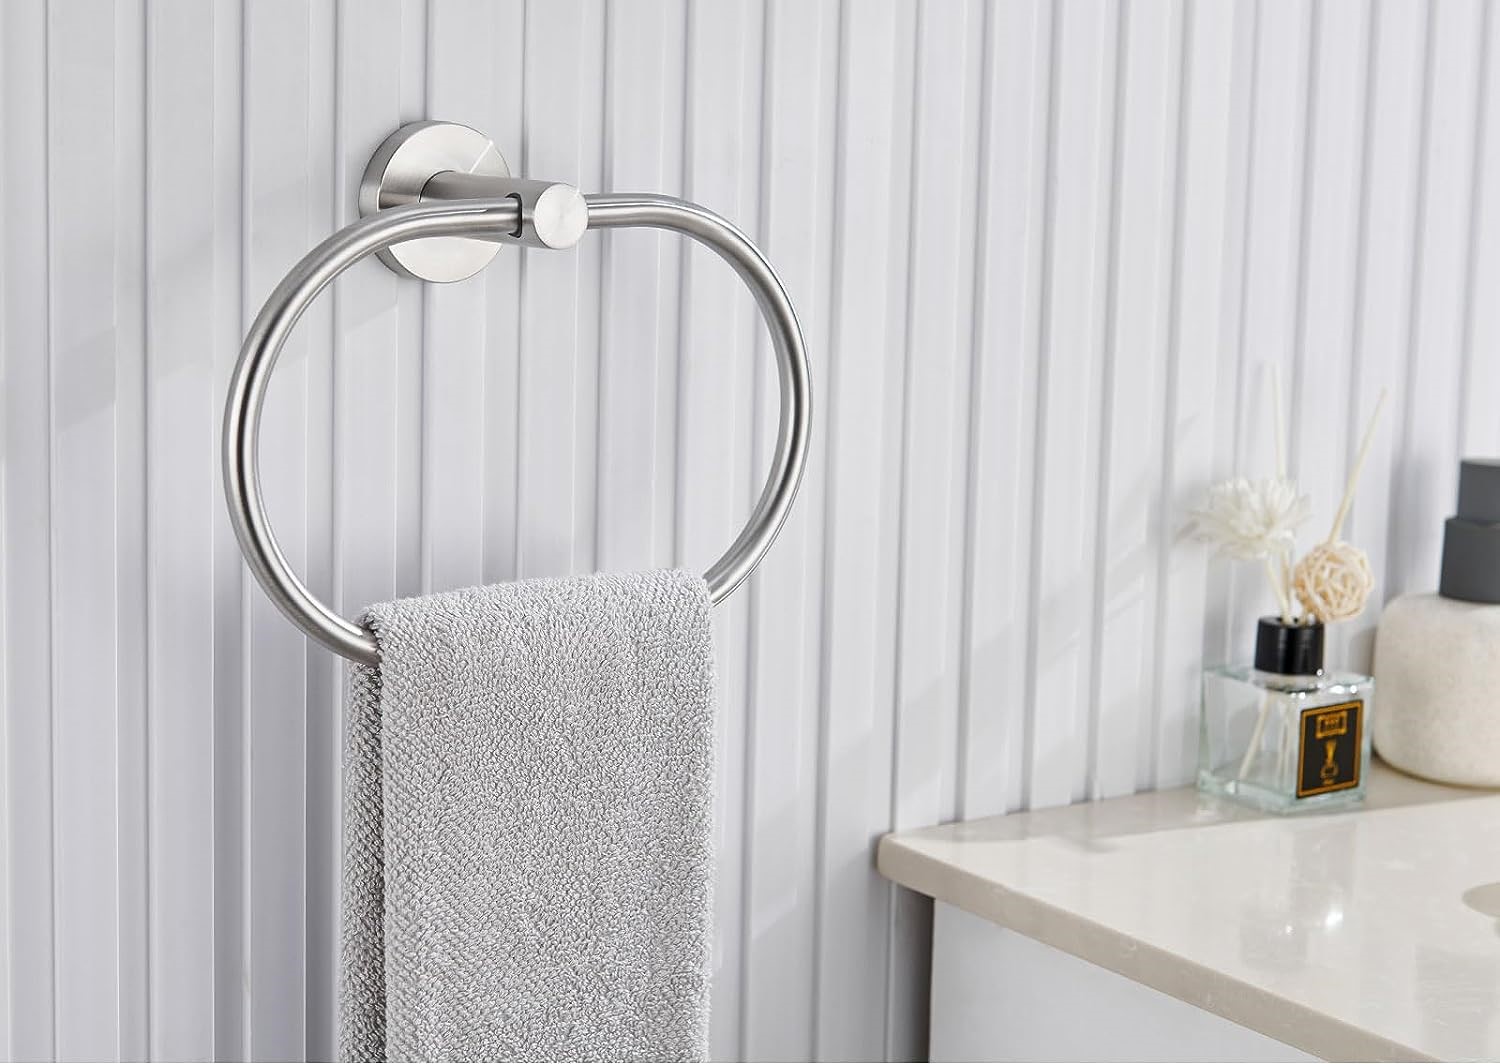 Amazon.co.jp: moin moin 2305tl2 Towel Hanger, Rack, Towel Bar, Towel Ring,  Brass, Gold, Retro, Antique, Wall Hanging, Stylish, Width 11.4 x Height 2.4  x Depth 2.8 inches (29 x 6.2 x 7.2